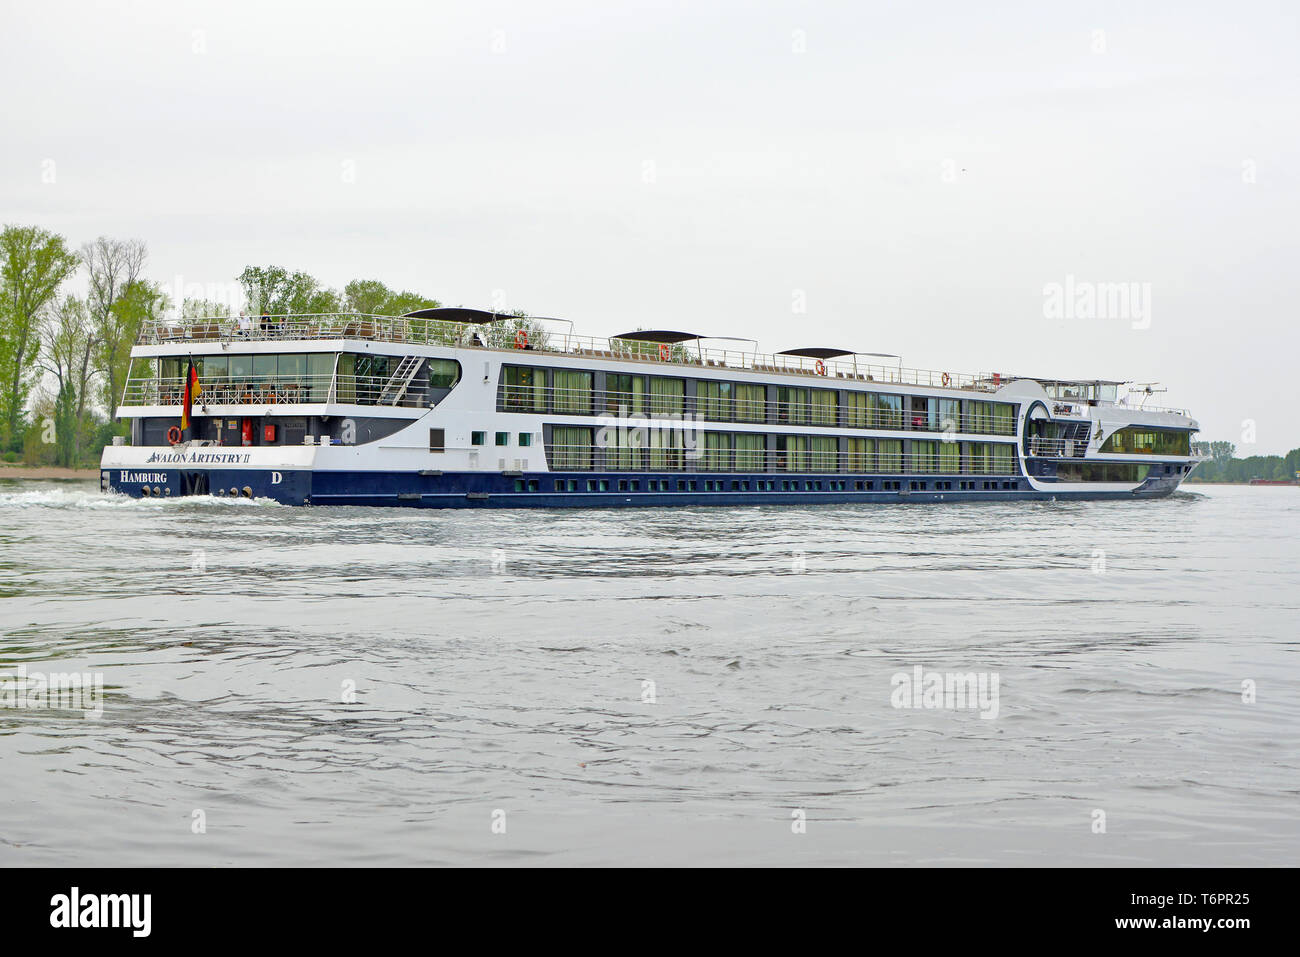 German cruise ship called Avalon Artistry II with passengers on the Rhein river Stock Photo